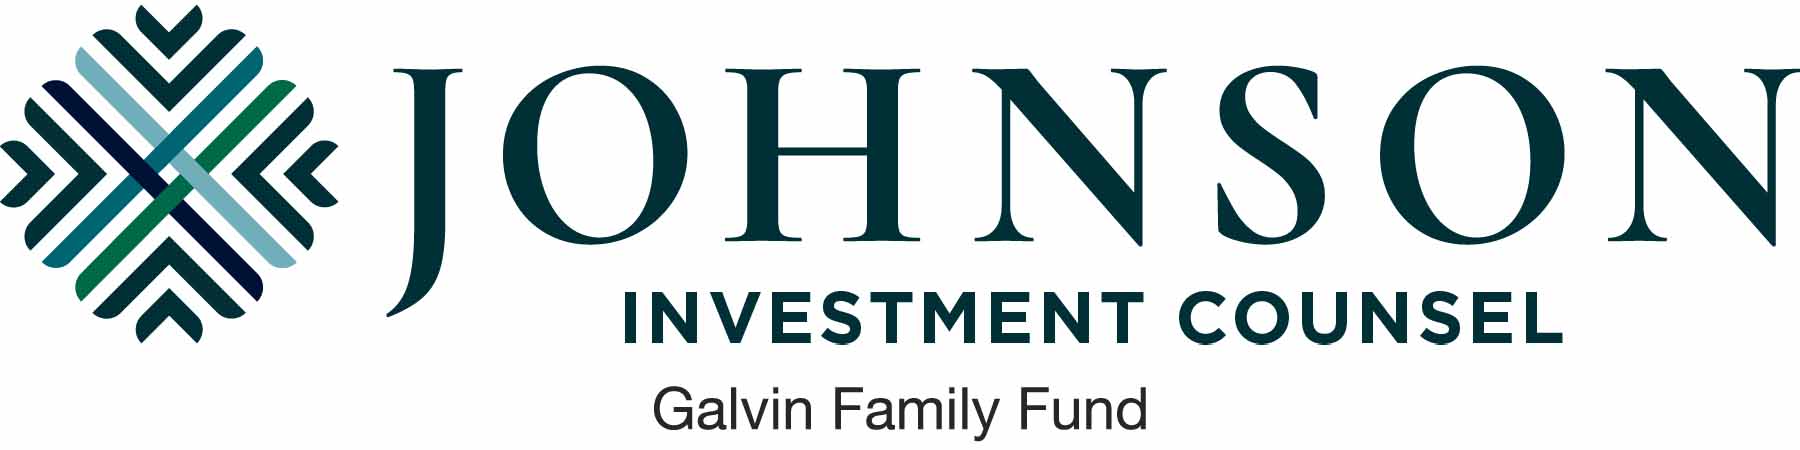 galvin family fund